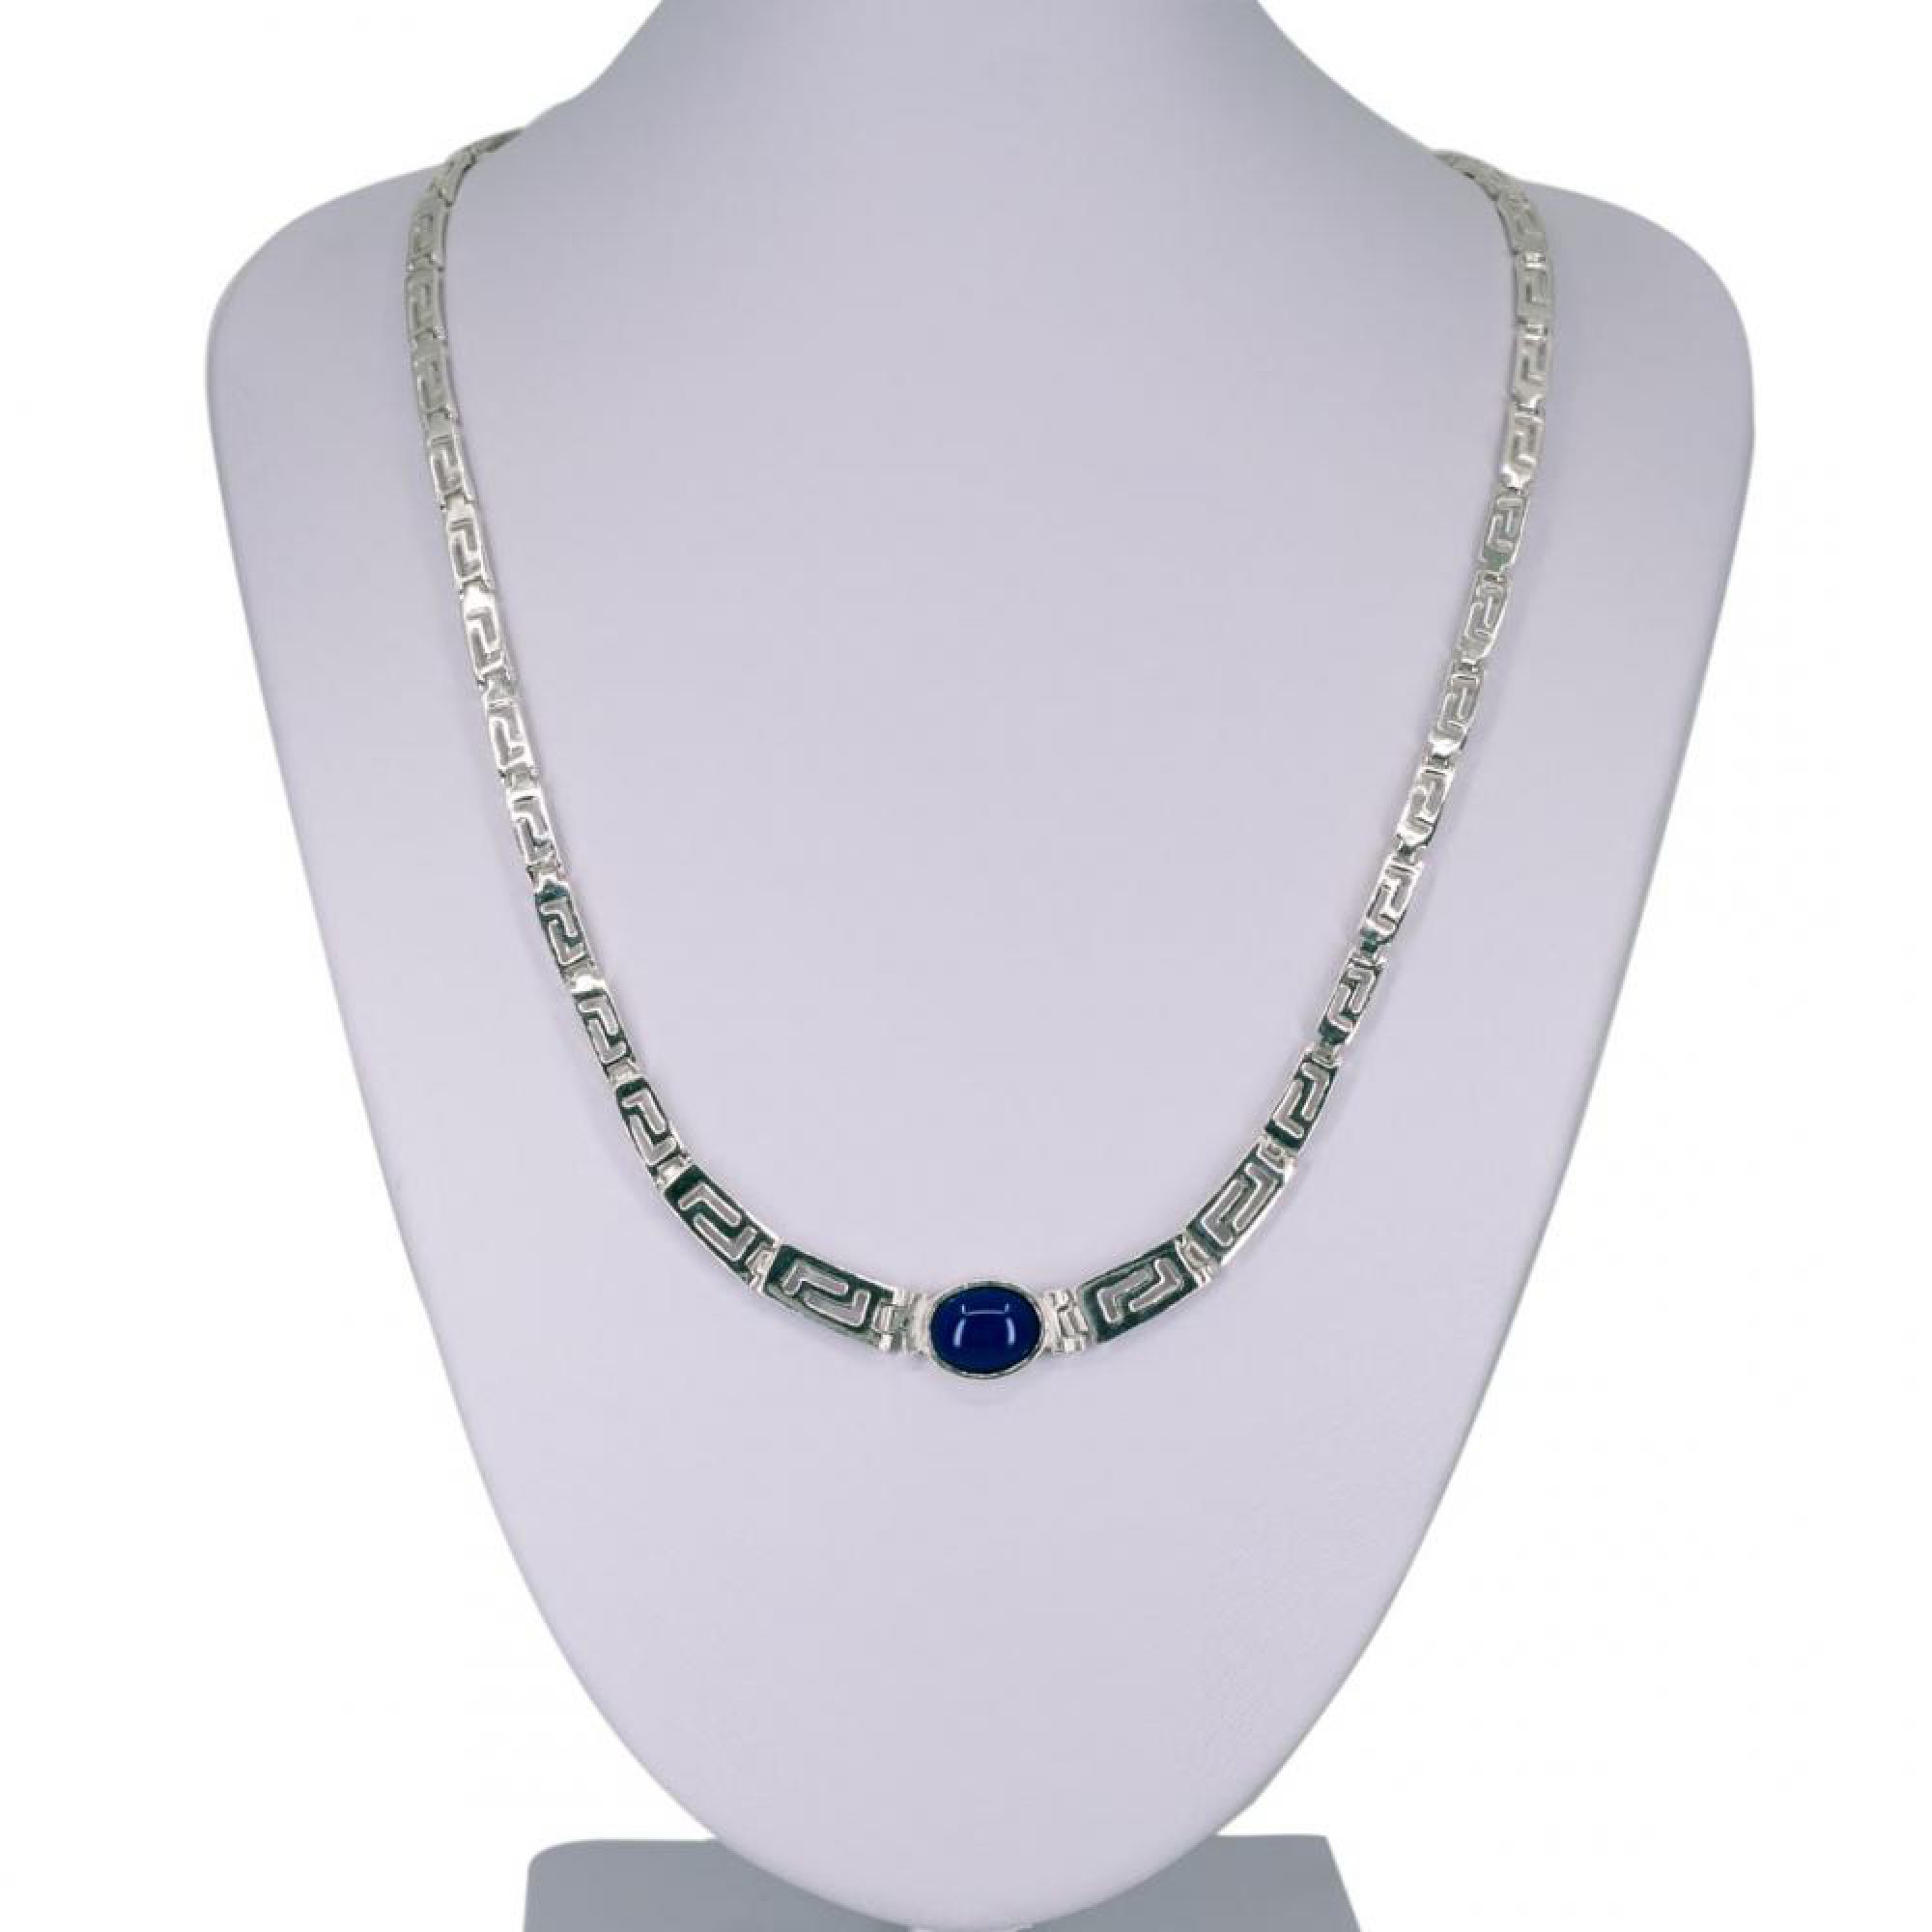 Meander necklace with lapis lazuli stone